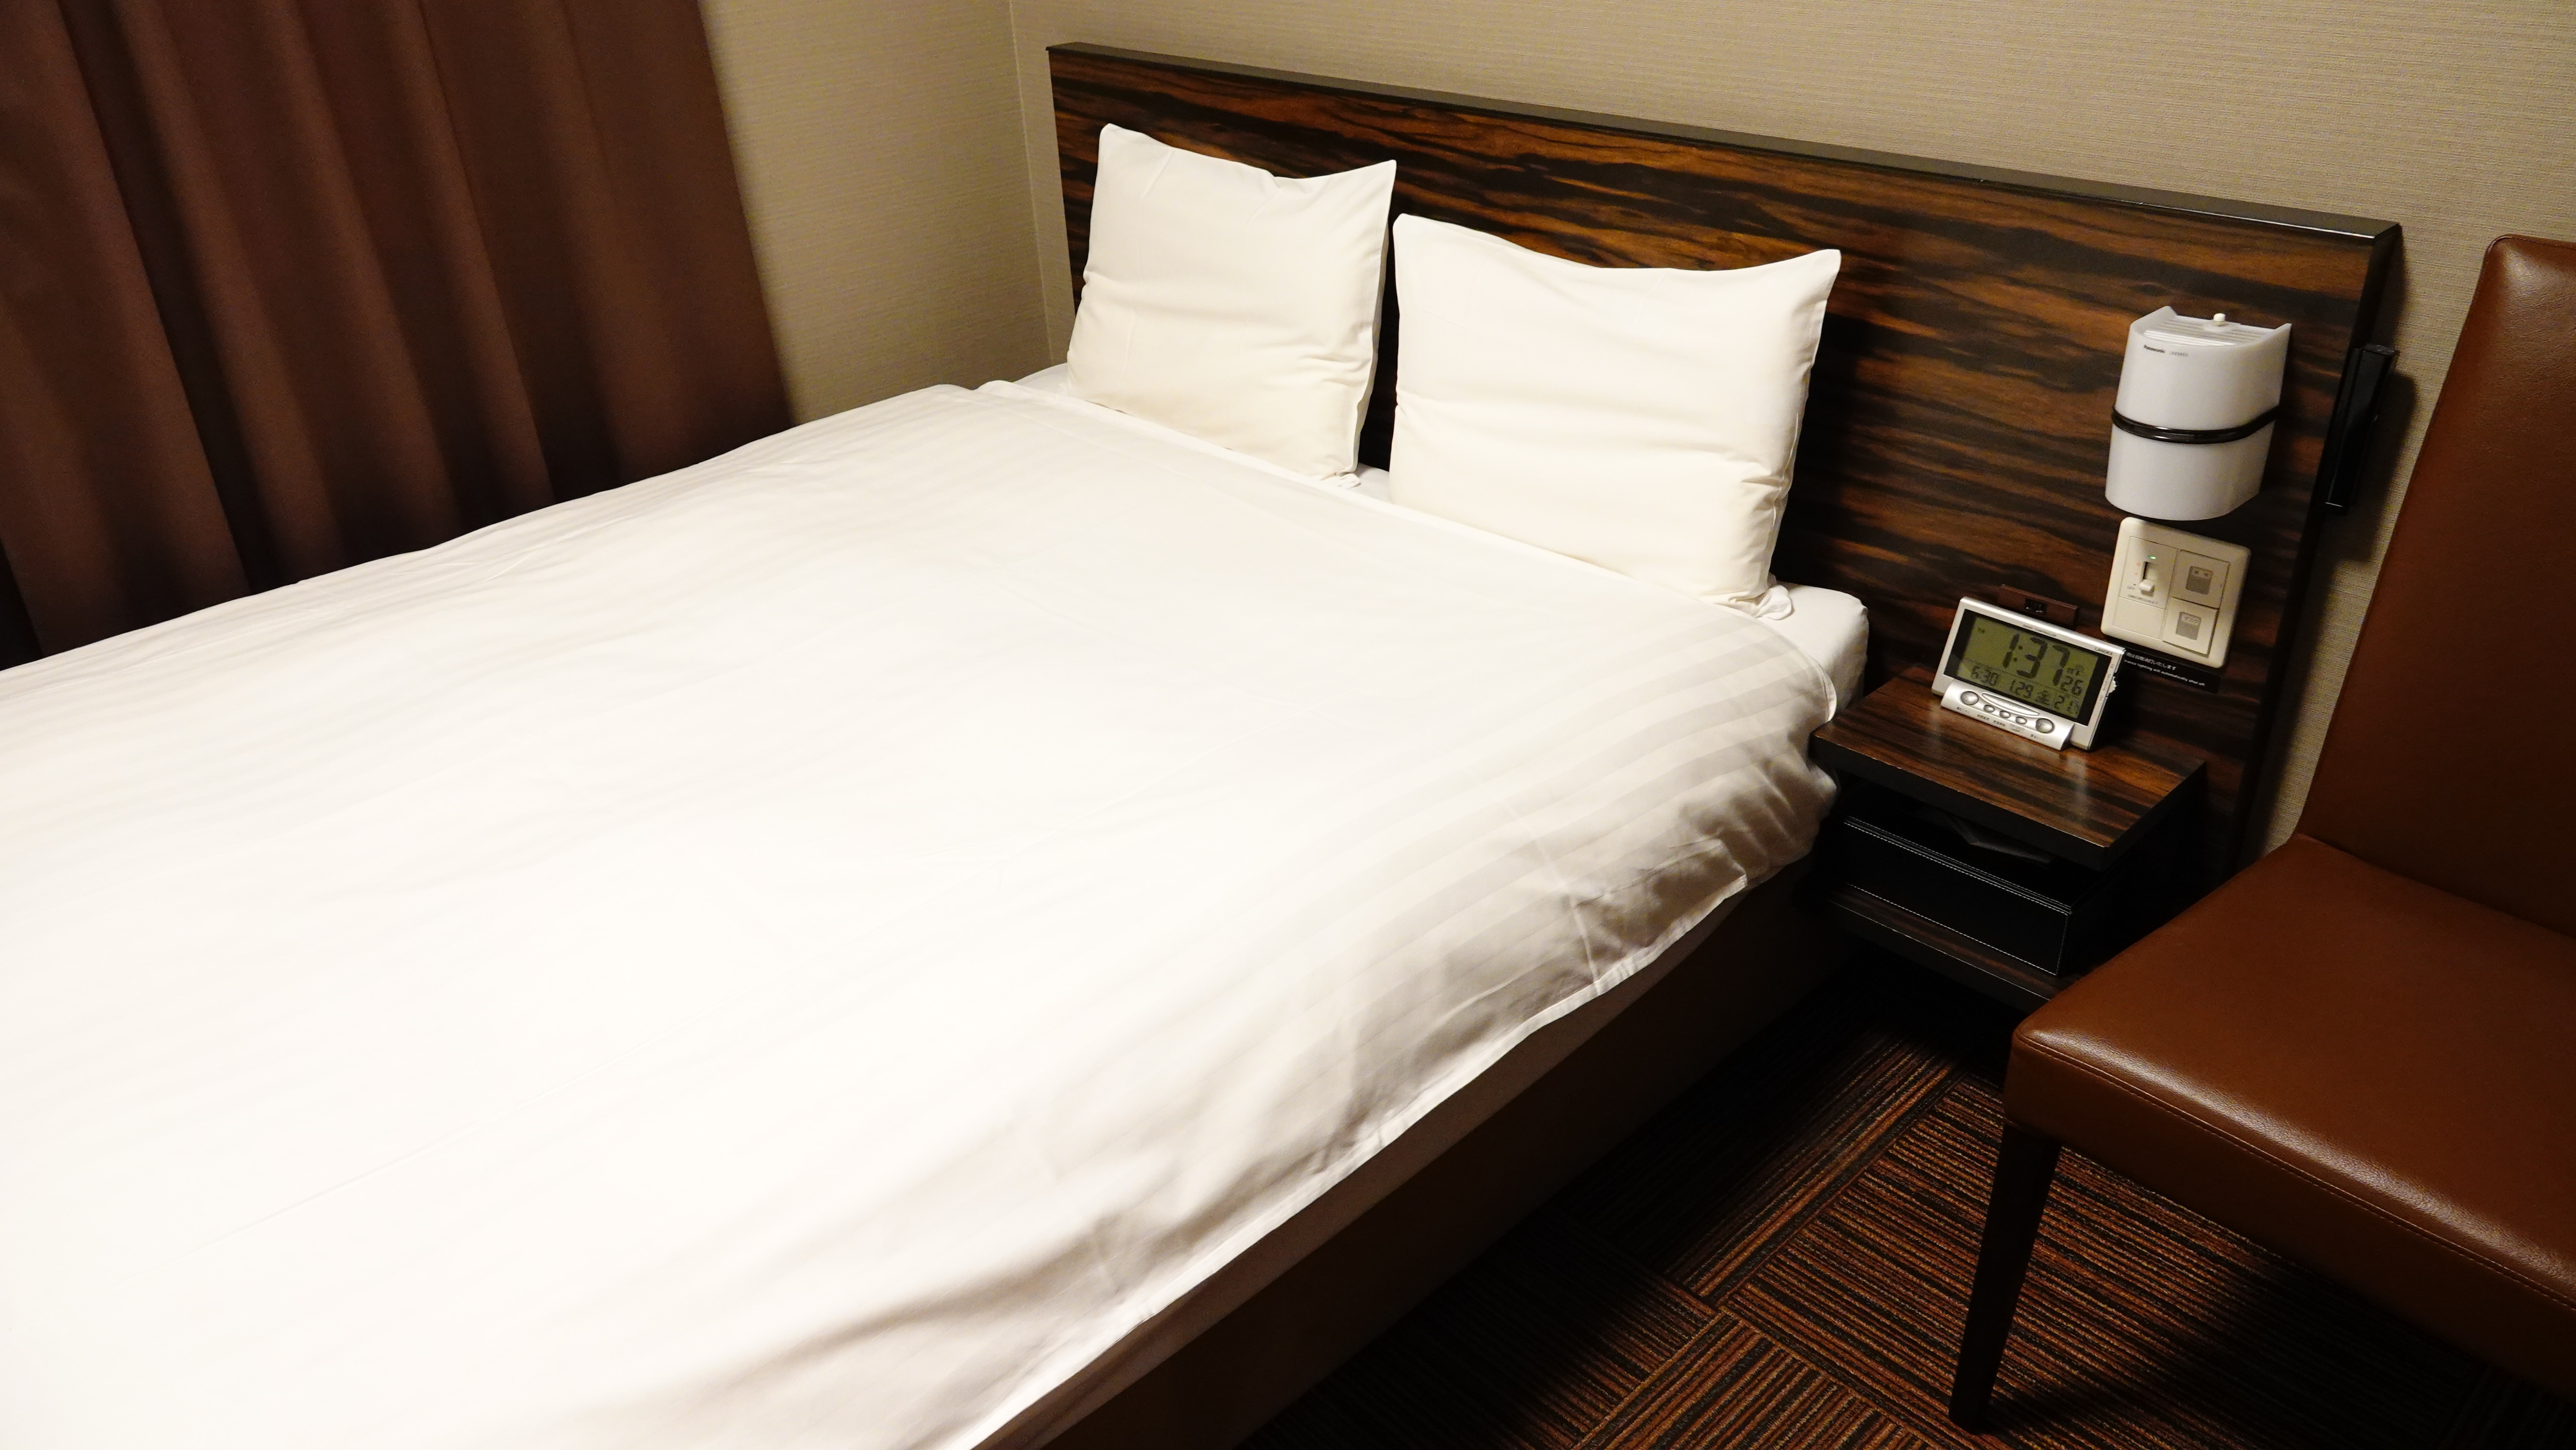 ■ Economy Double Room 15.0 sqm, no shower booth (bed width 140 cm & times; 195 cm) ■